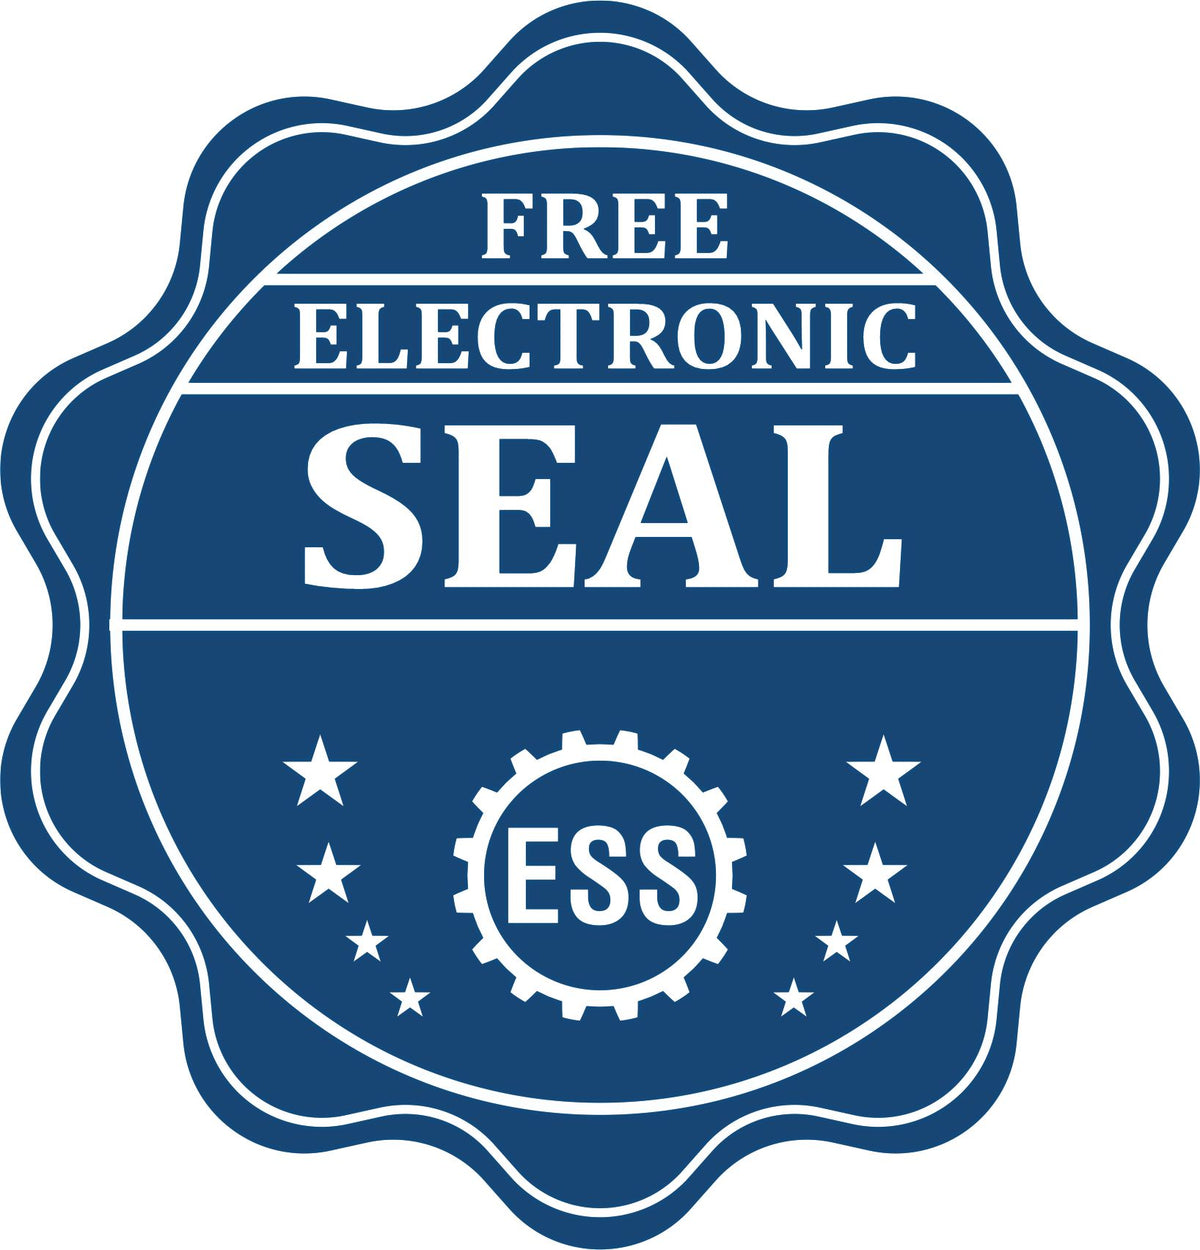 A badge showing a free electronic seal for the Handheld Georgia Land Surveyor Seal with stars and the ESS gear on the emblem.